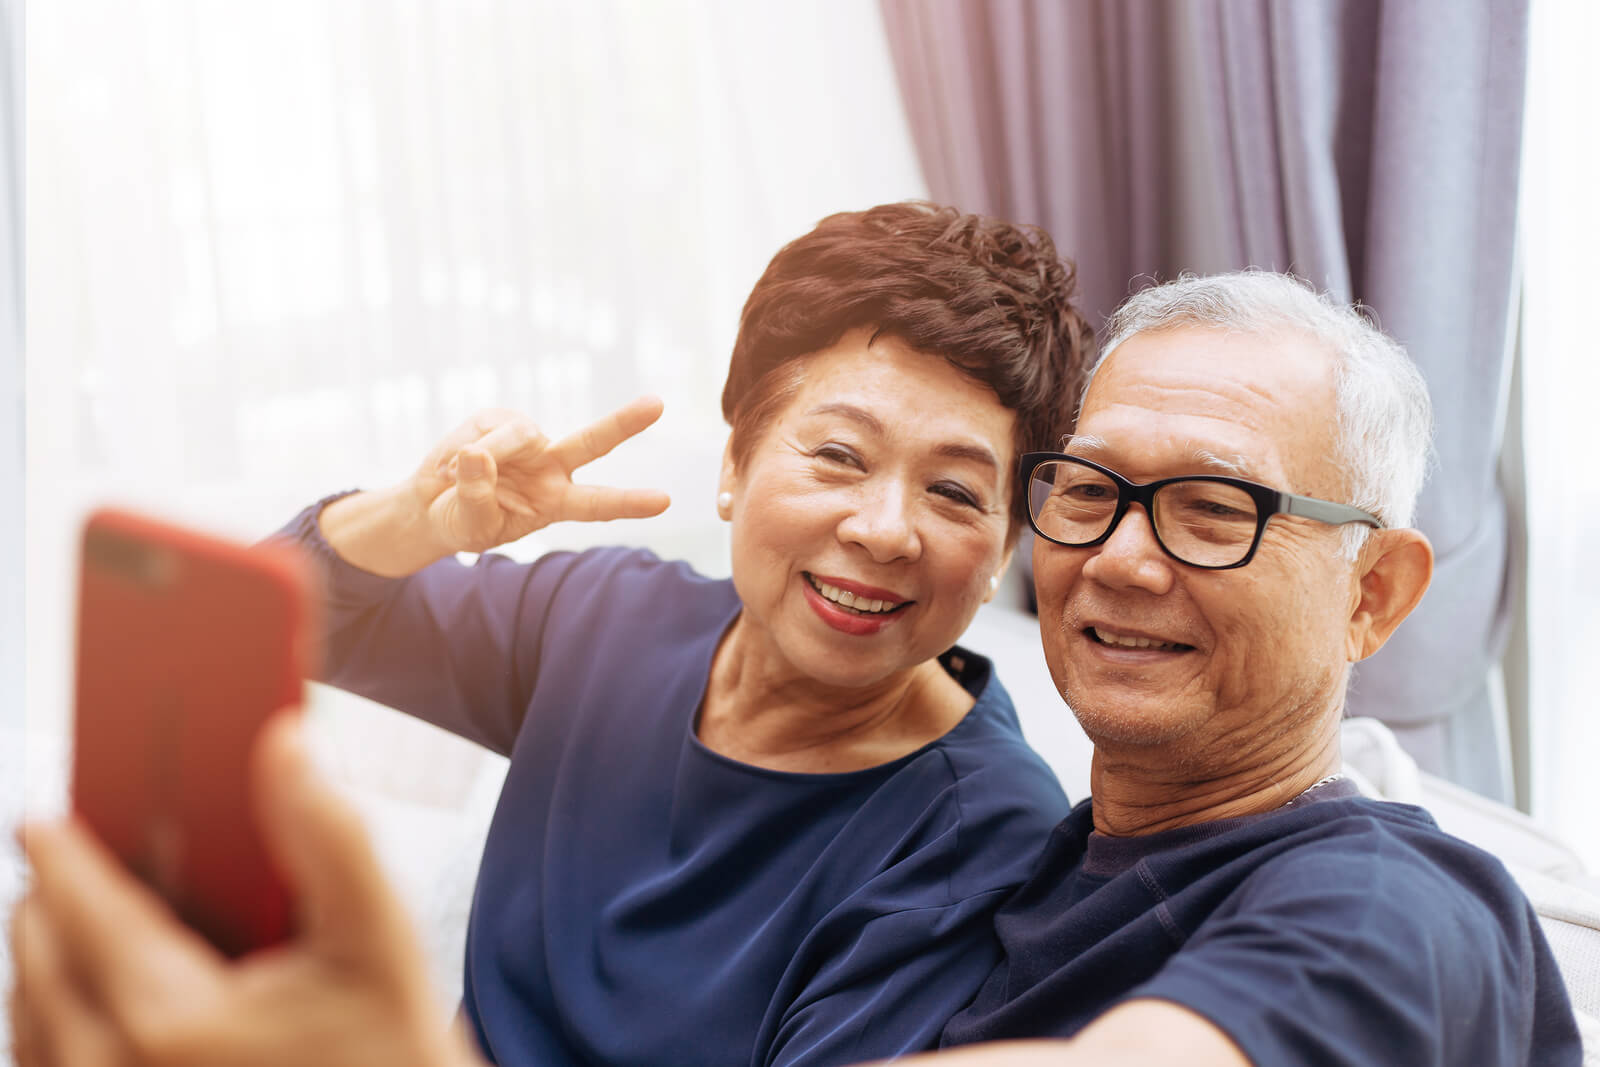 Elderly Couple Smiling taking a photo together